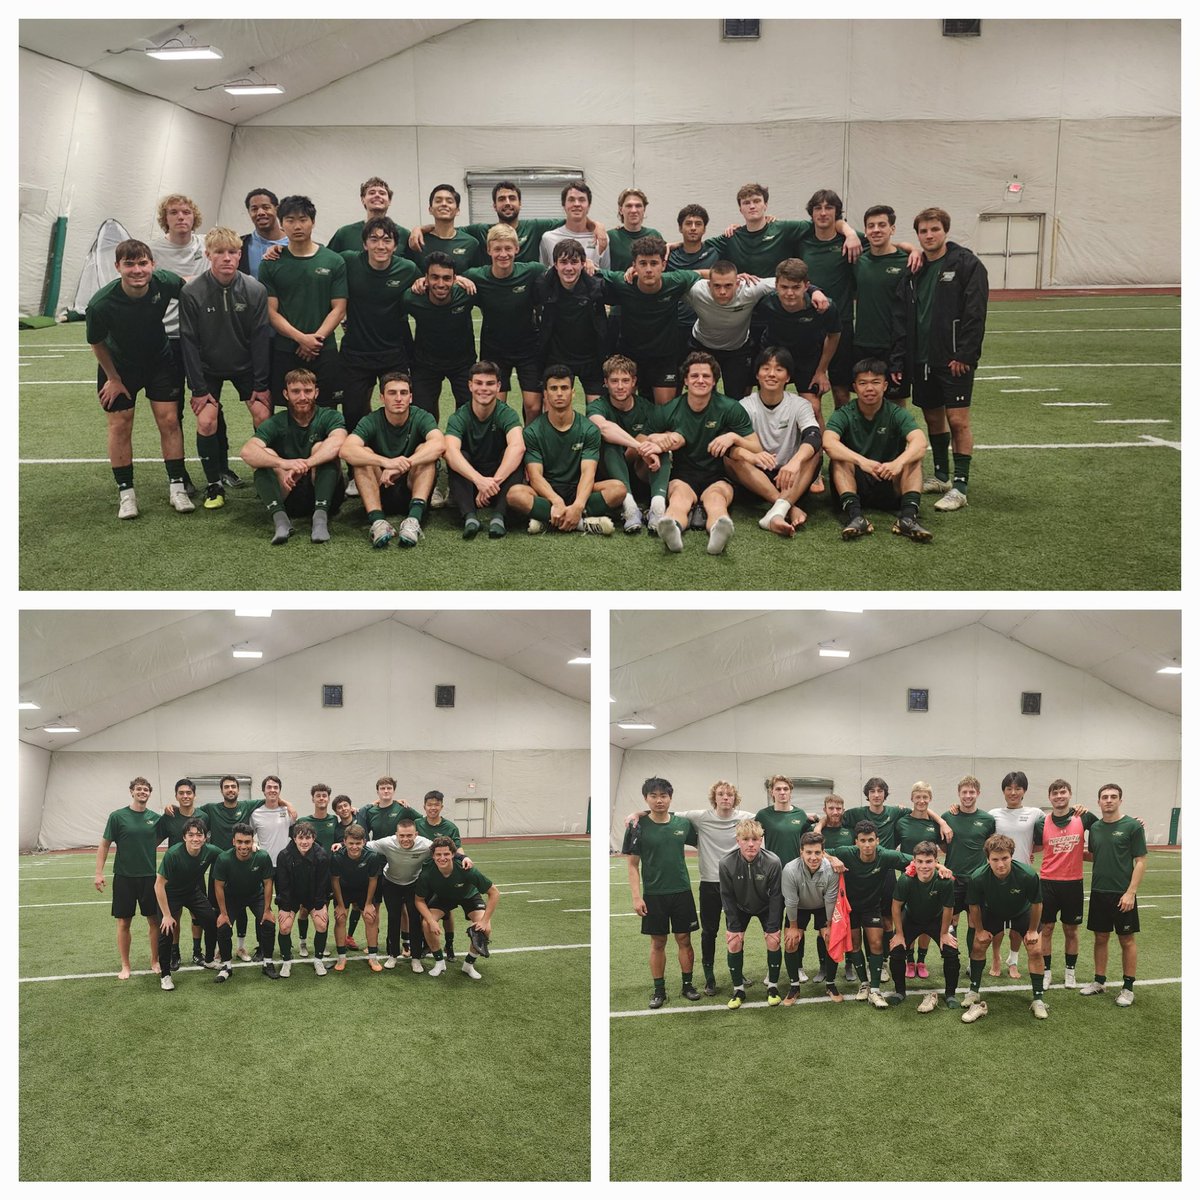 Weather wasn't nice, lucky to have a dome to go into.Great last practice of Spring before tomorrow's last Spring game at home at 12pm followed by Alumni game. Here we have team photo, lower left Tournament Champions, lower Right Regular season Champions! #minerpride #itsaWEthing